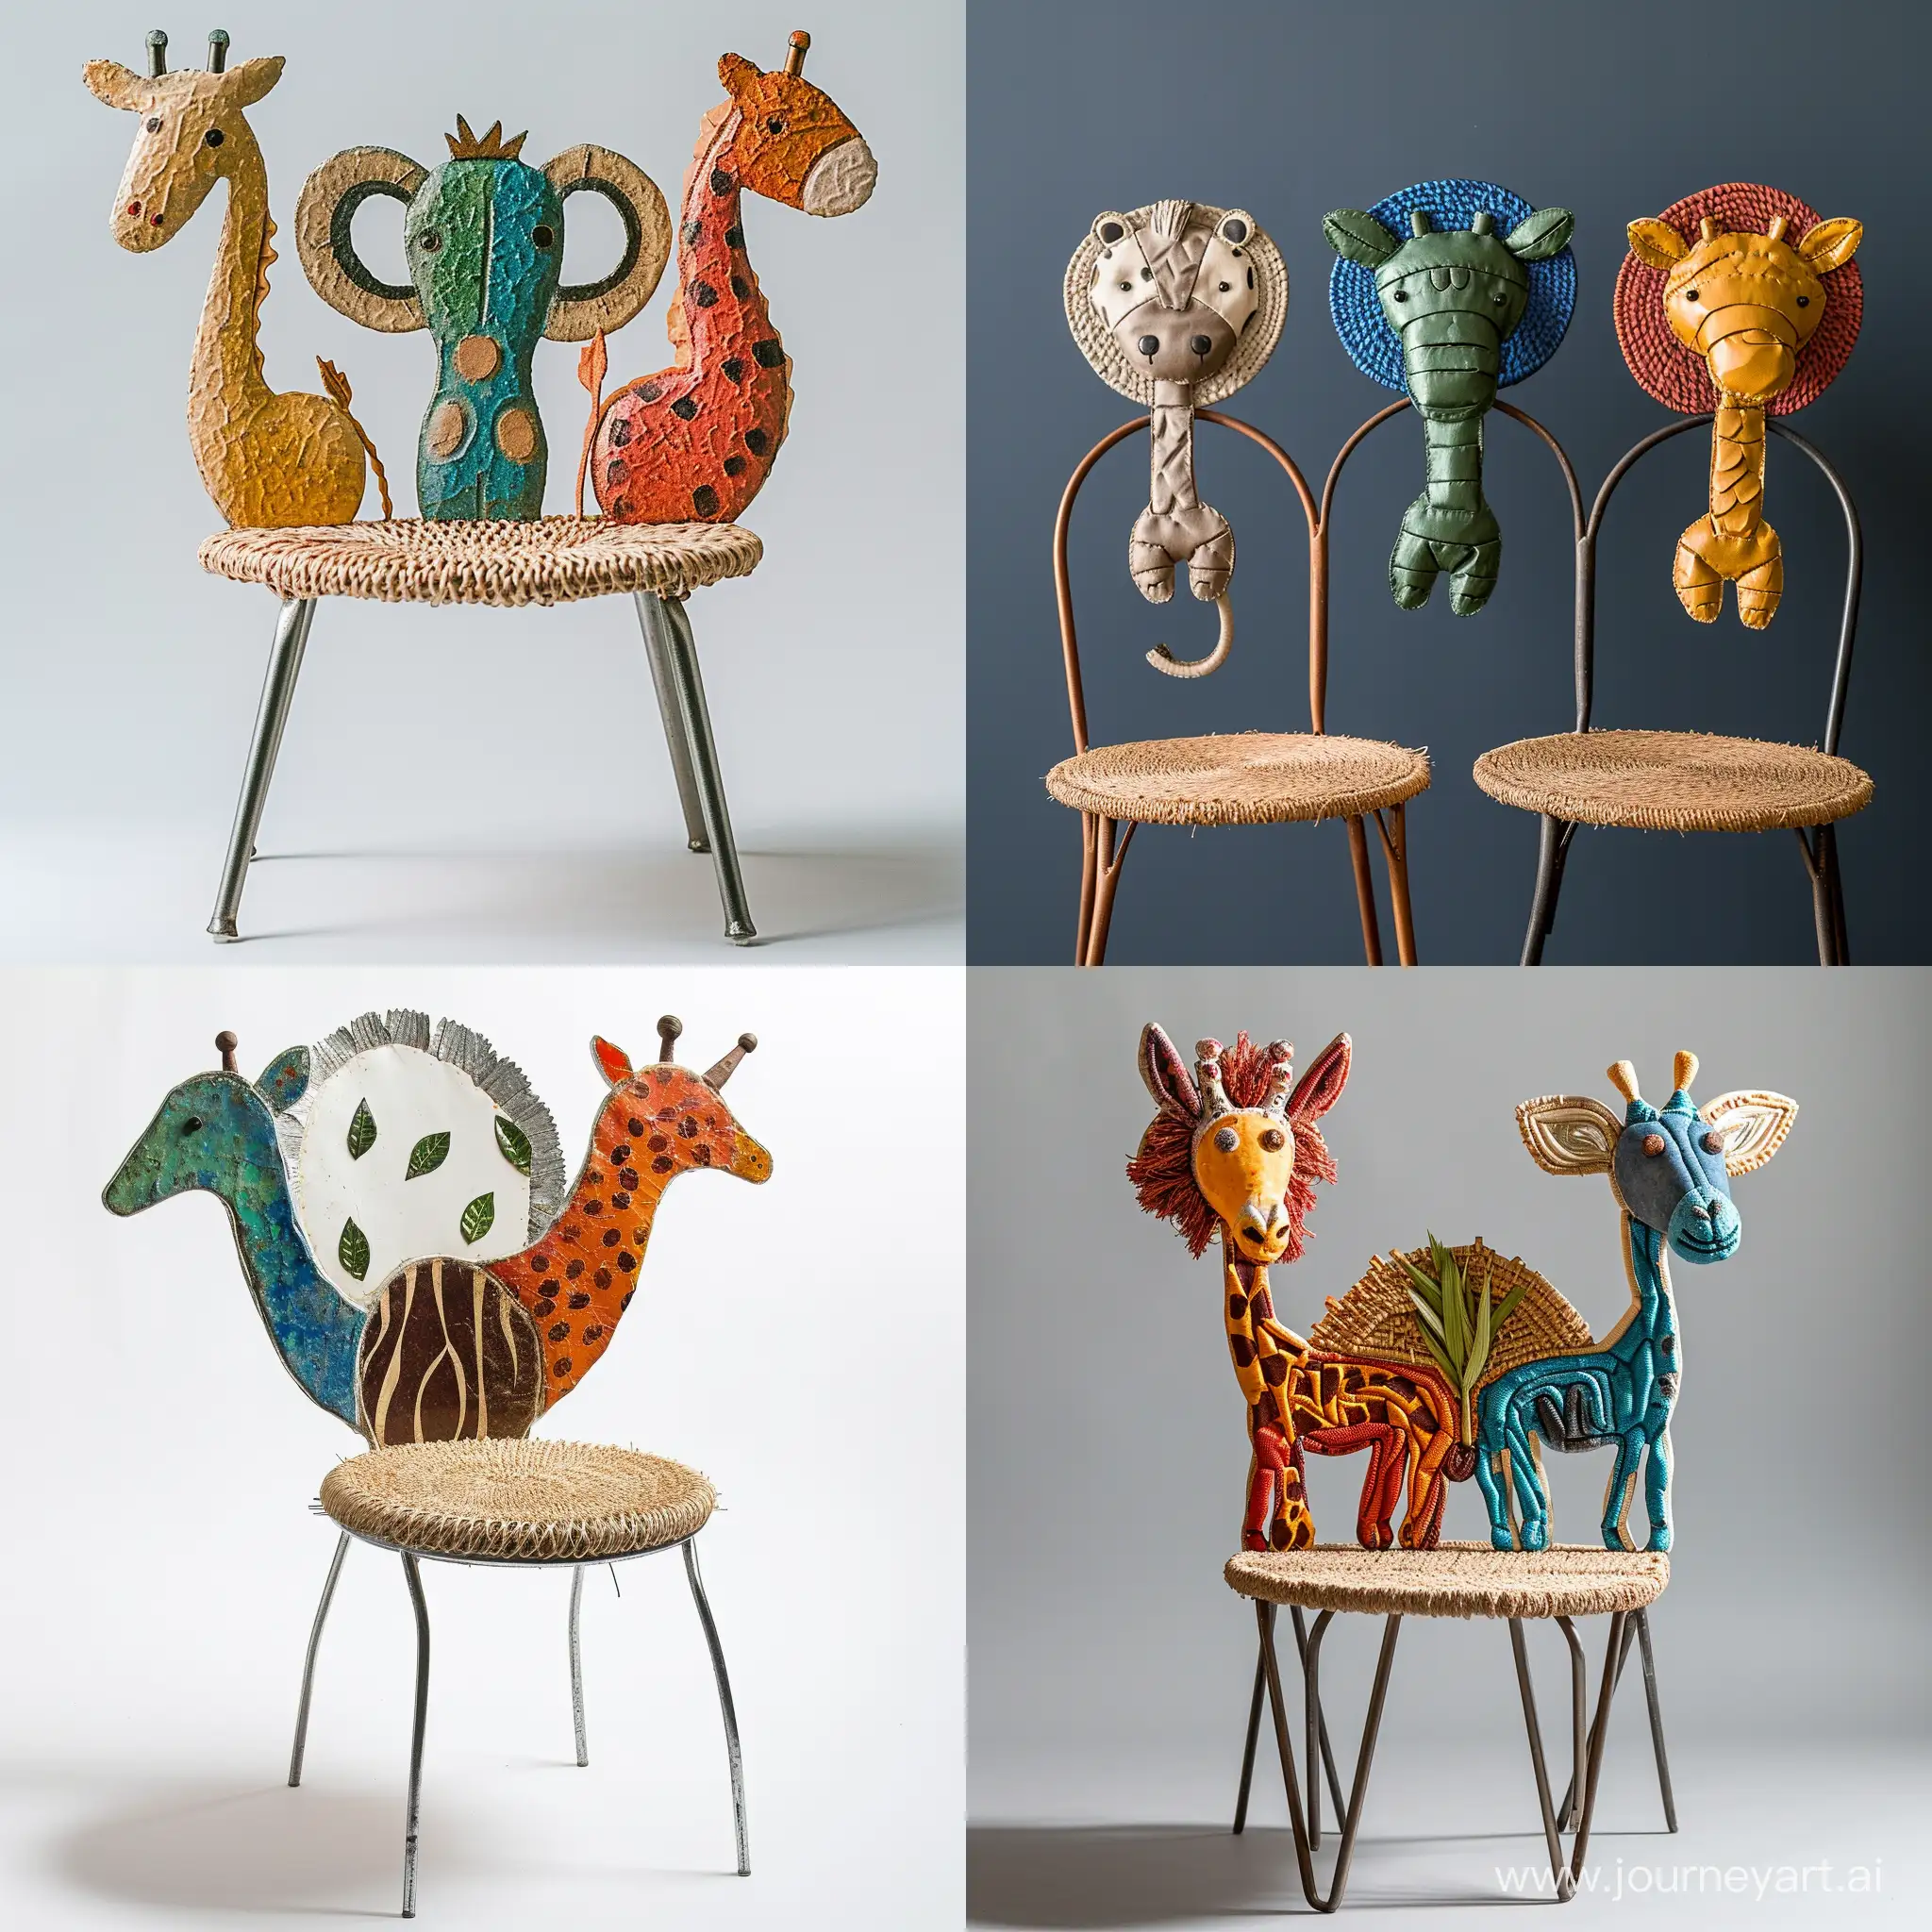 imagine cute and Thin and using The least amount of material for construction a sturdy children’s chair inspired by safari animals, with backrests shaped like different creatures. Use recycled metals for the frame and woven plant fibers for seating areas, depicted in colors representative of the chosen animals. The seat should stand approximately 30cm tall, built to educate about wildlife and ensure durability.realistic style